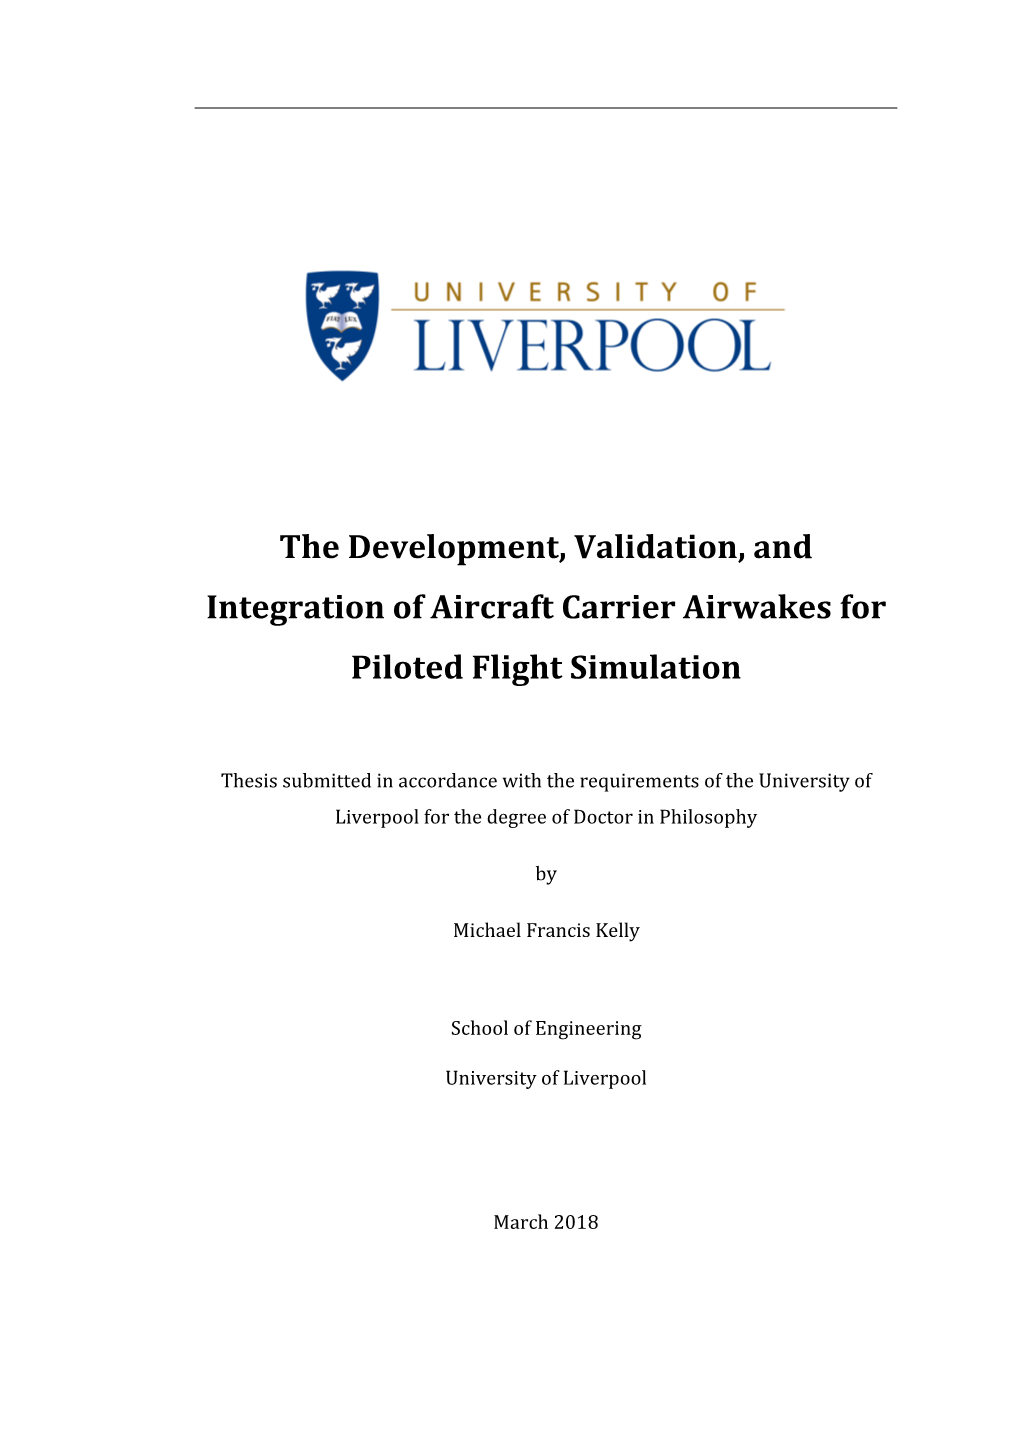 The Development, Validation, and Integration of Aircraft Carrier Airwakes for Piloted Flight Simulation